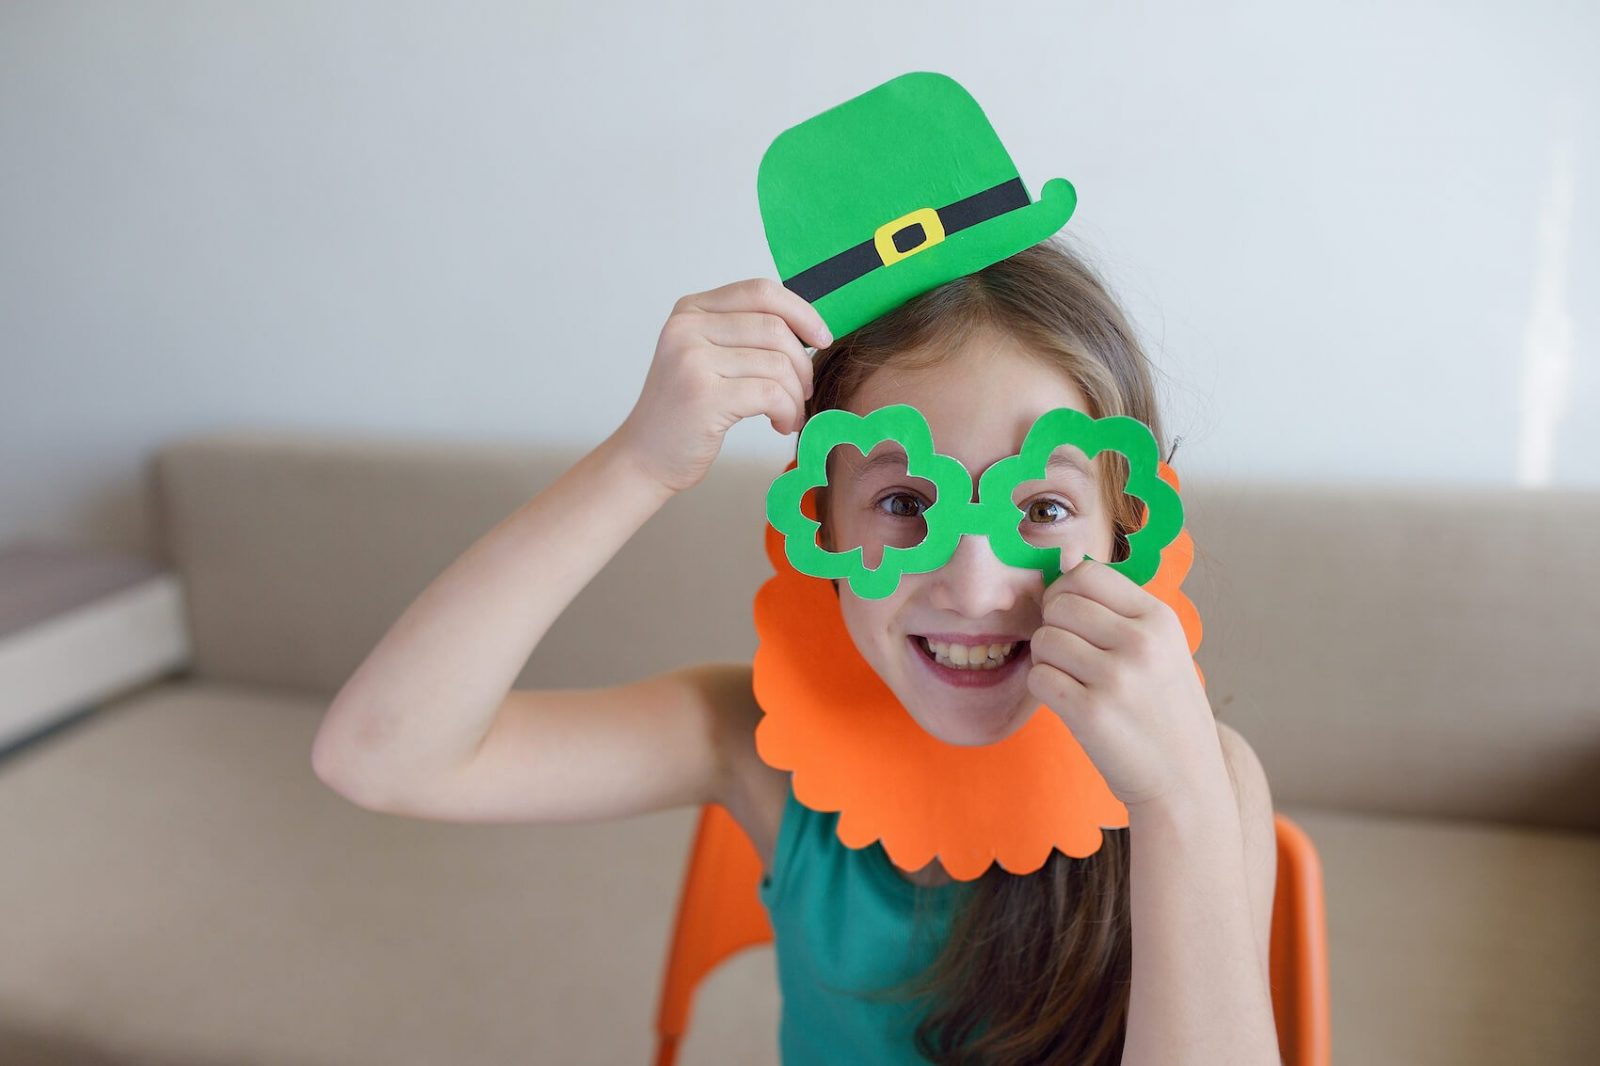 What Irish Mythological Creature Are You? St. Patrick's Day costume